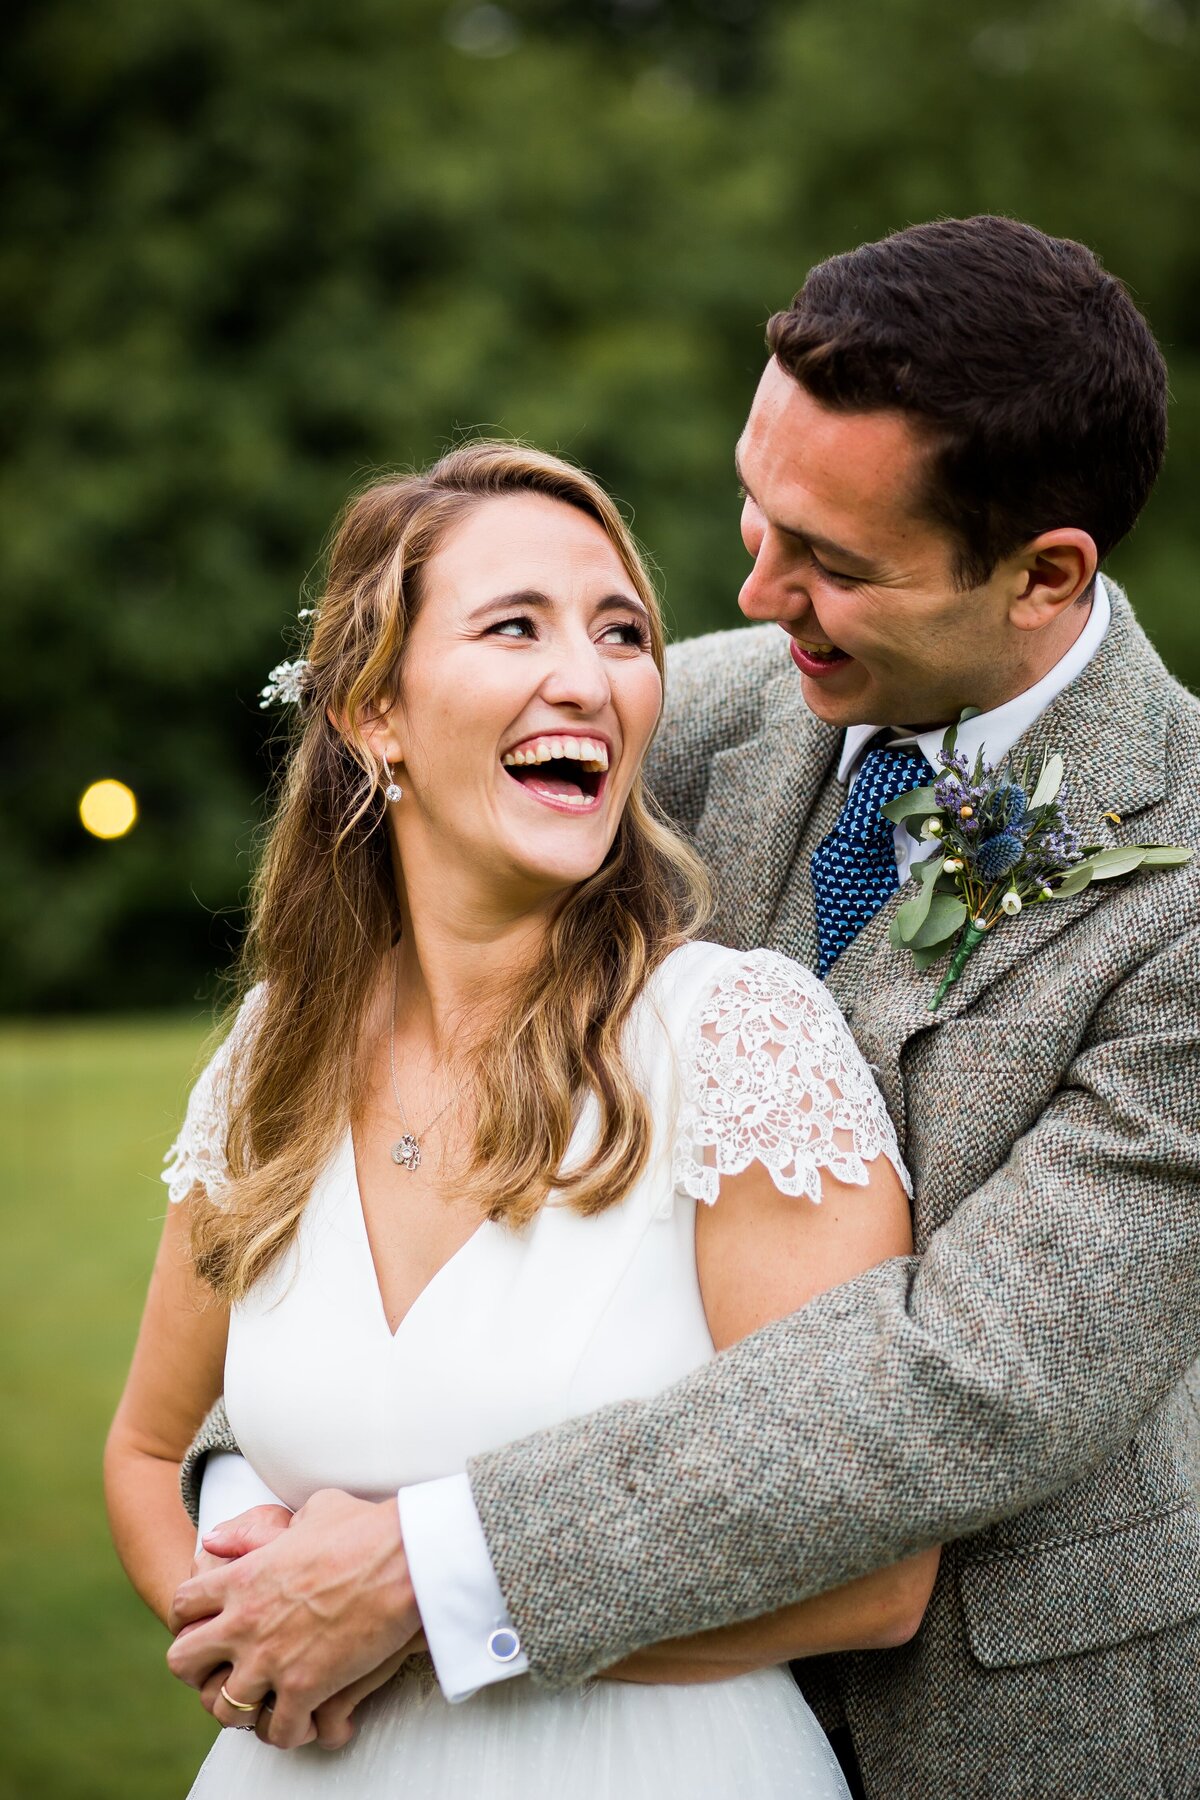 Bride and groom in embrace laughing on wedding day